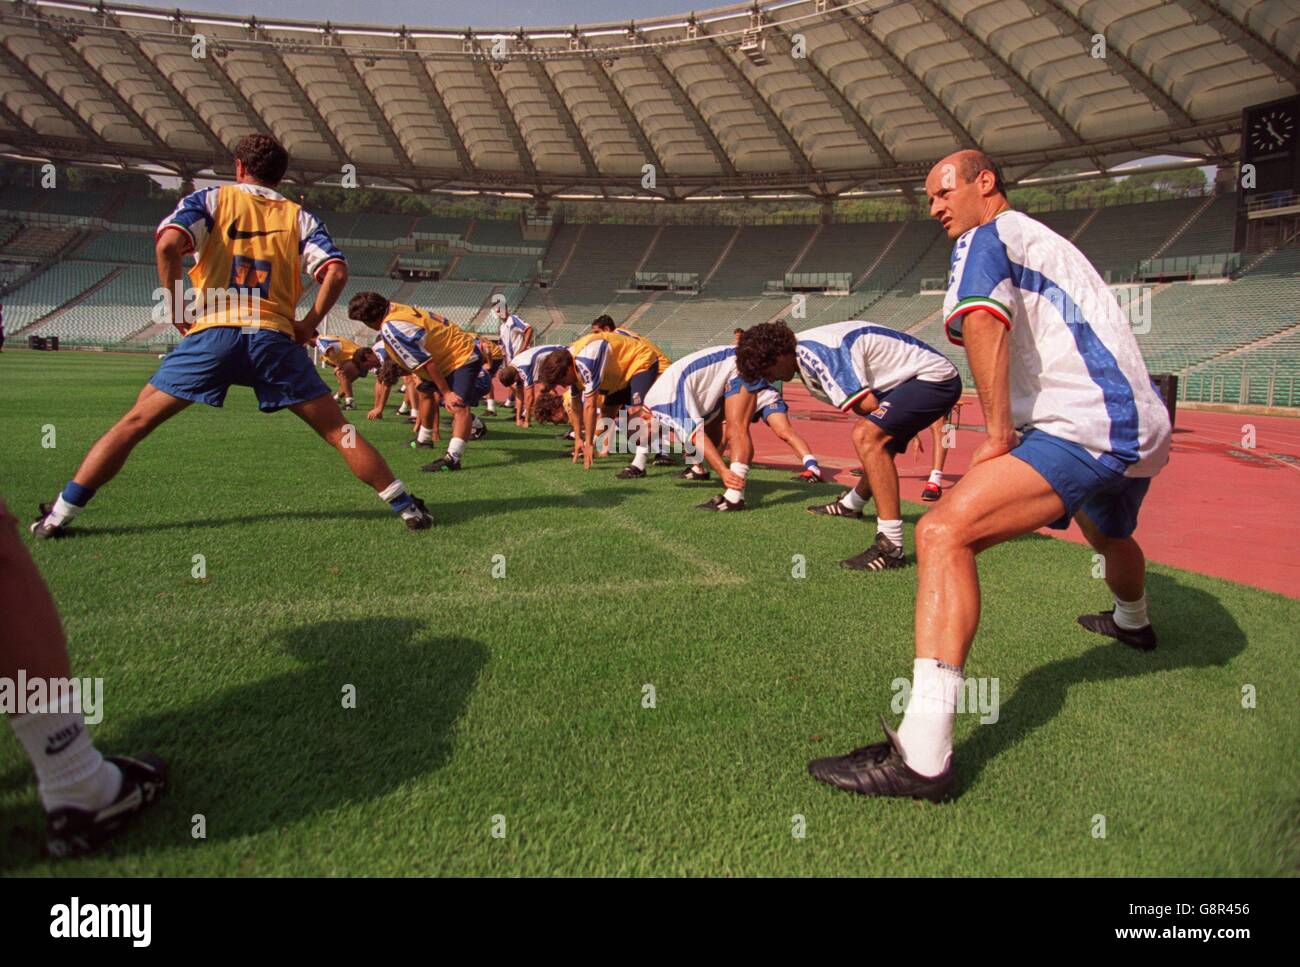 Soccer - World Cup Qualifier - Italy v England - Italy Training. Italy's Attilio Lombardo (right) during training Stock Photo